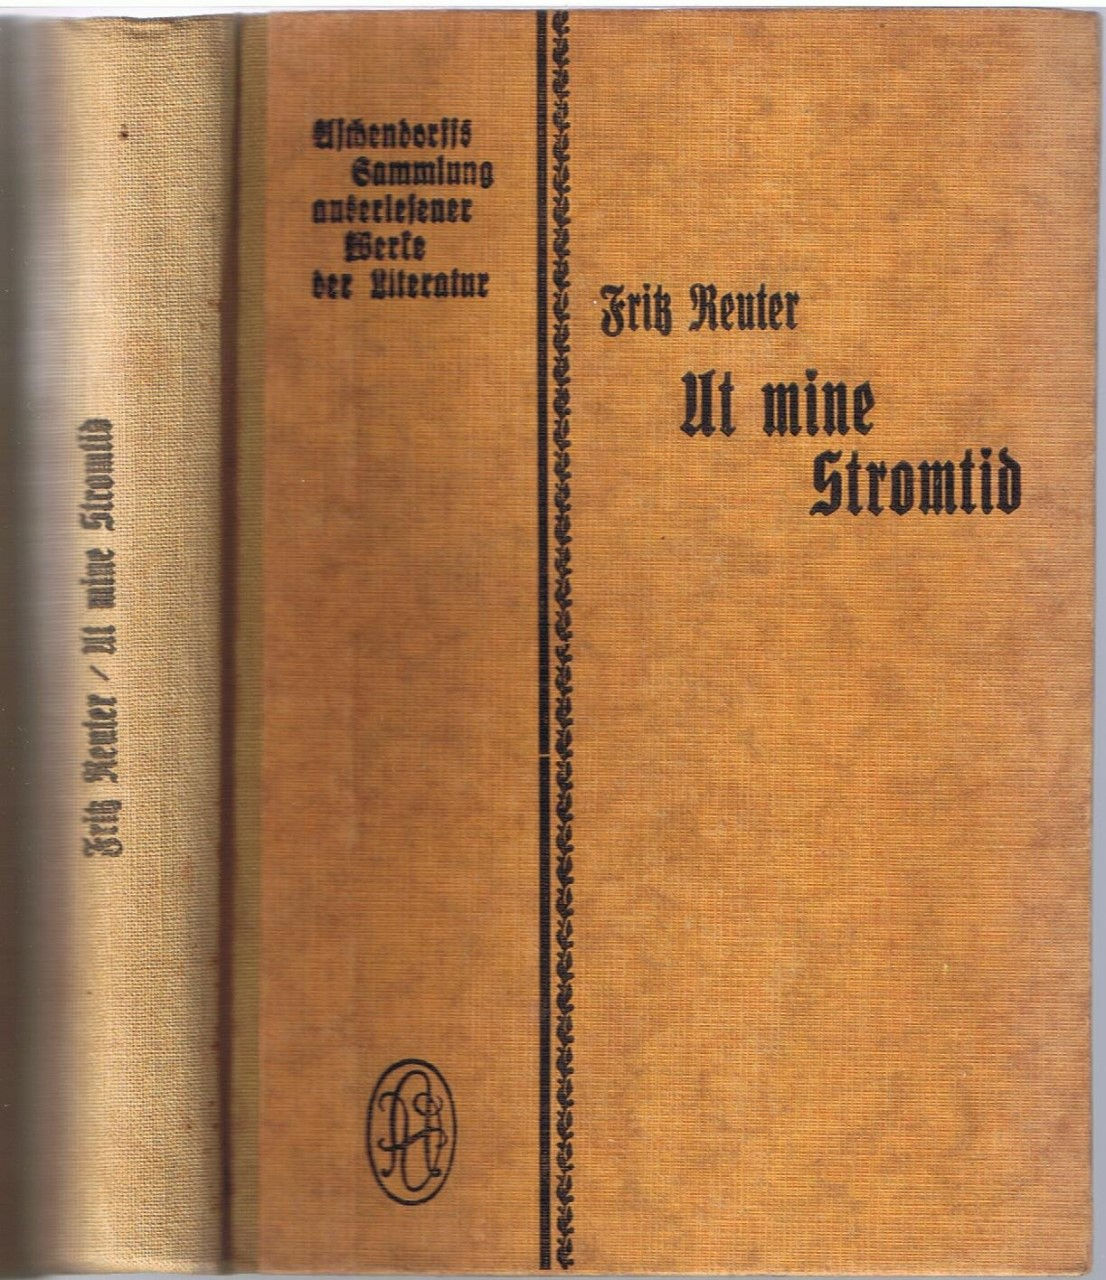 Cover of the work